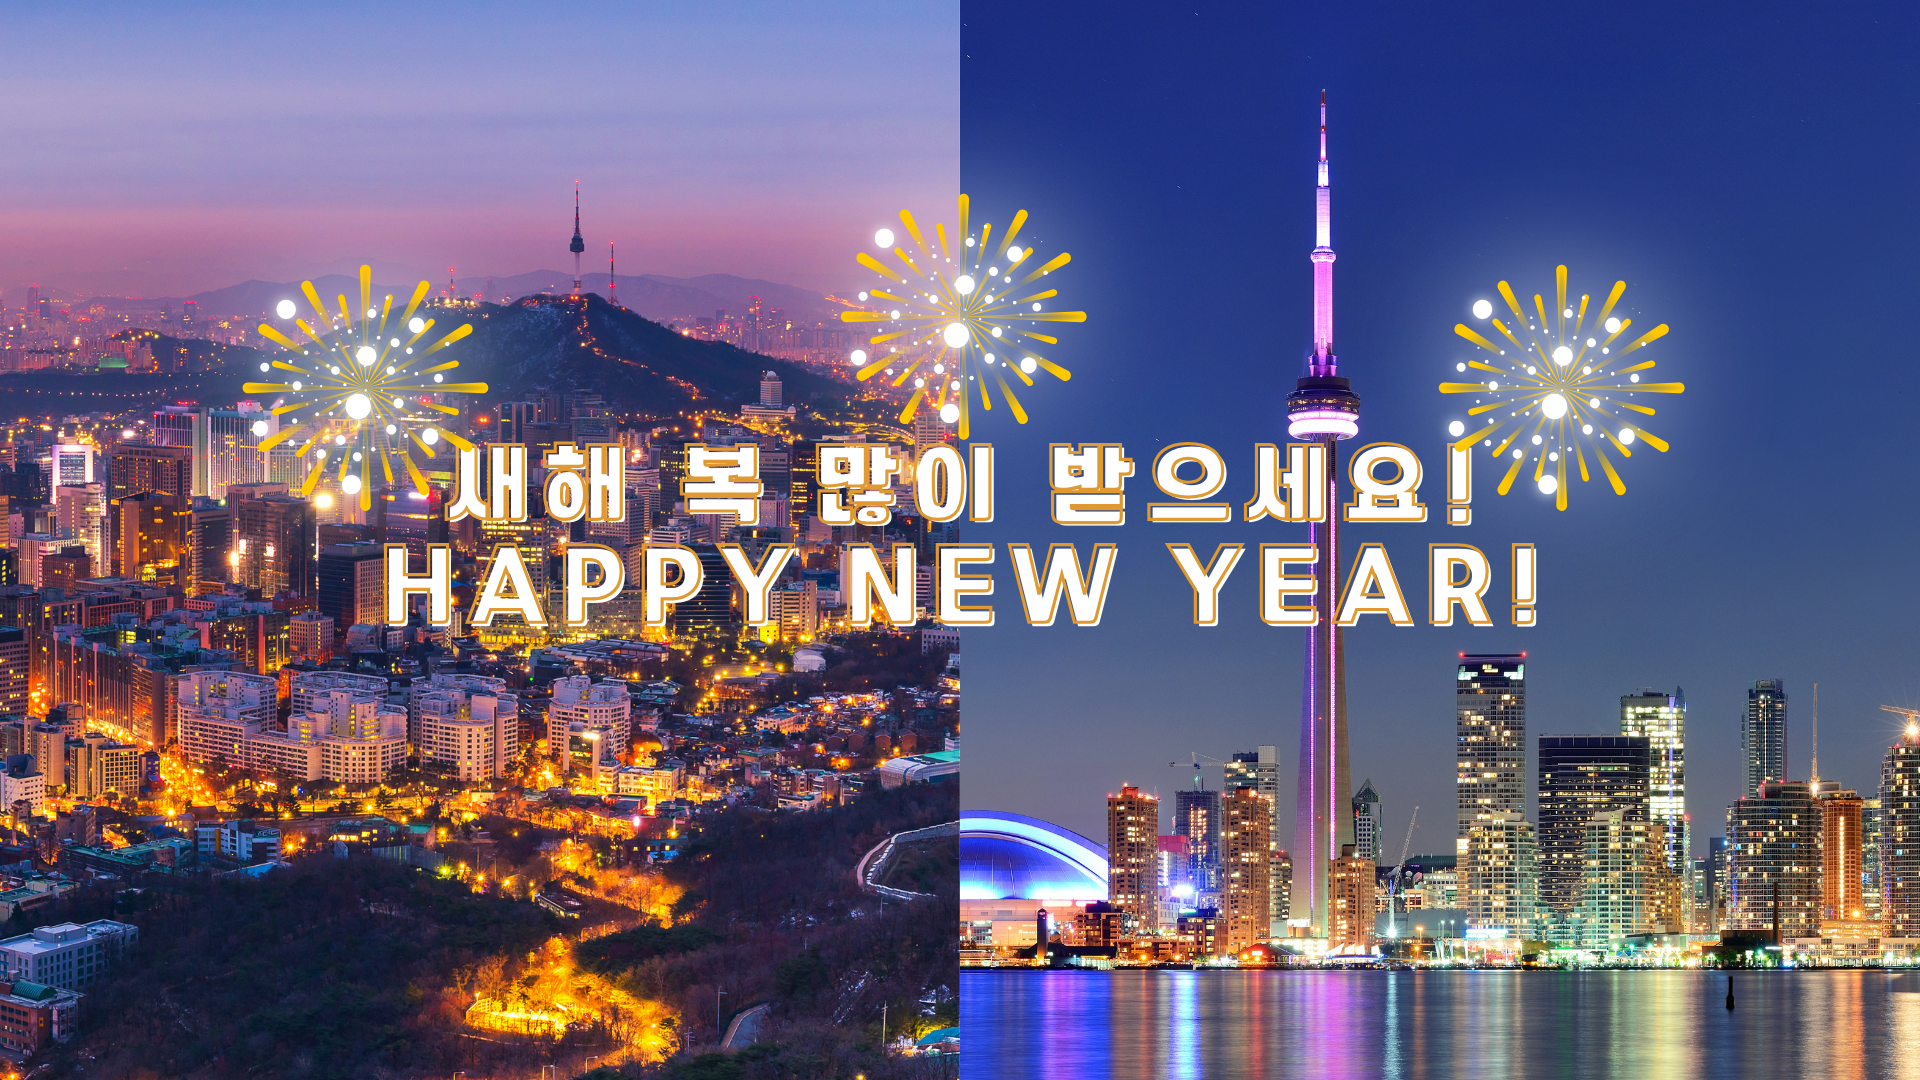 Happy new year fireworks in Seoul, South Korea and Toronto, Ontario, Canada, Triple Momentum celebration message happy new year.